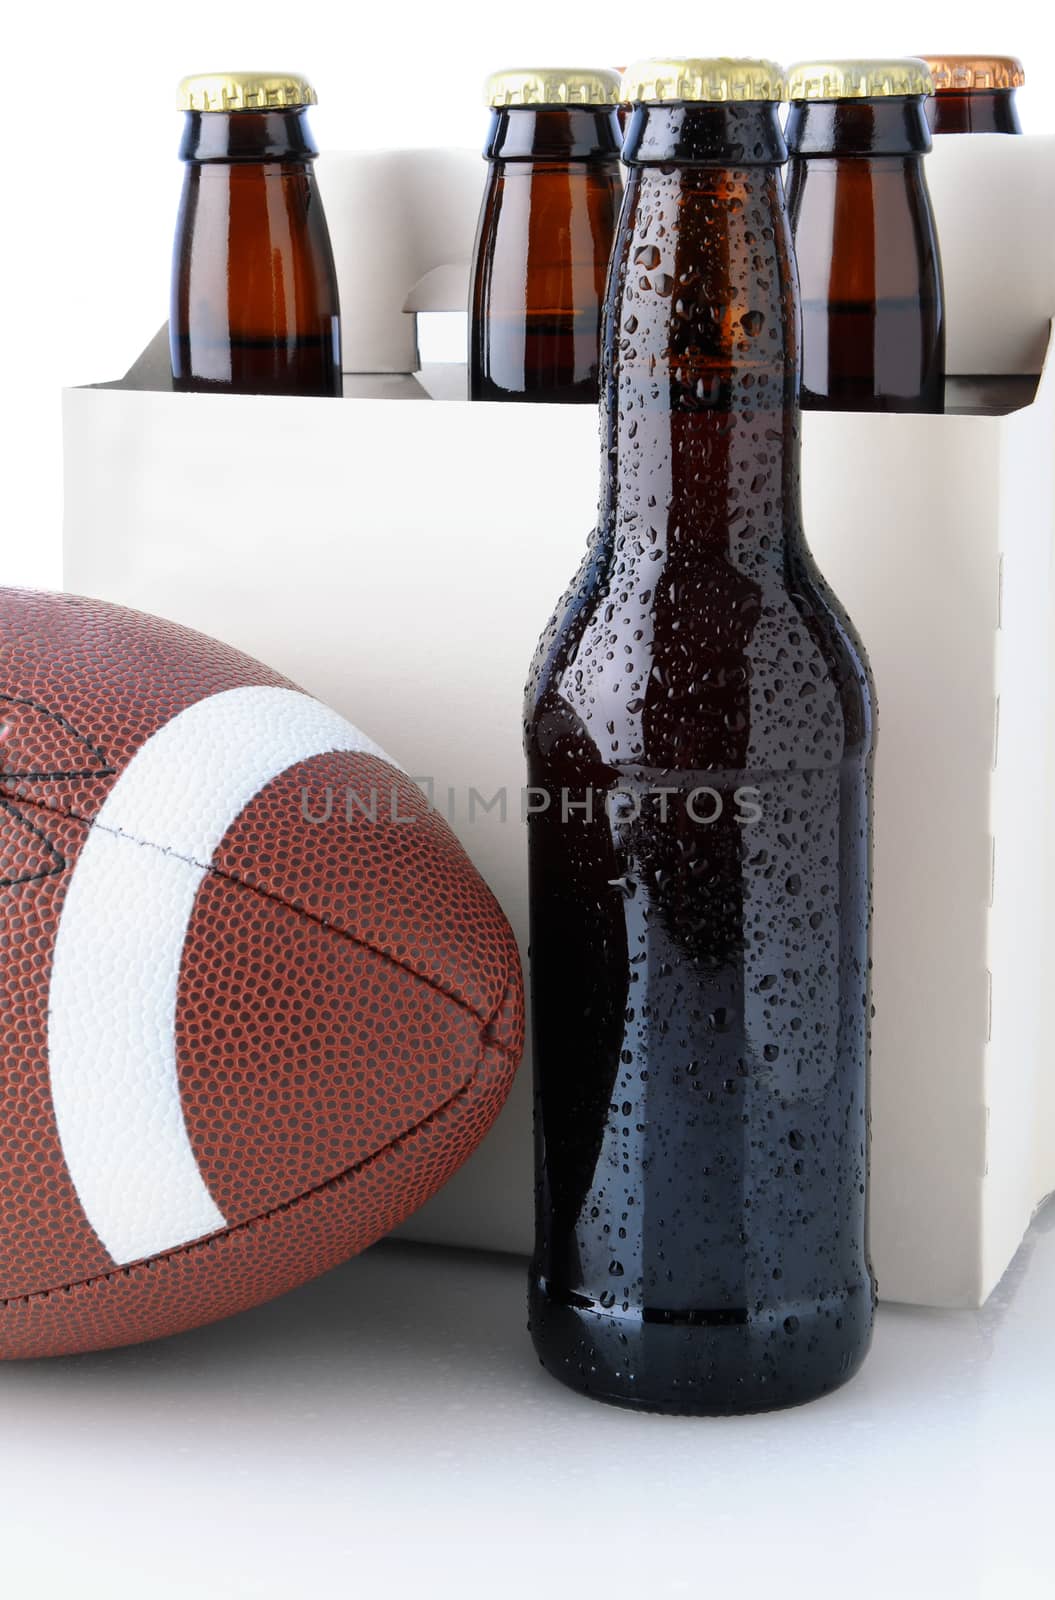 Six pack of beer with an American Football in front. Vertical format isolated on white with reflection.